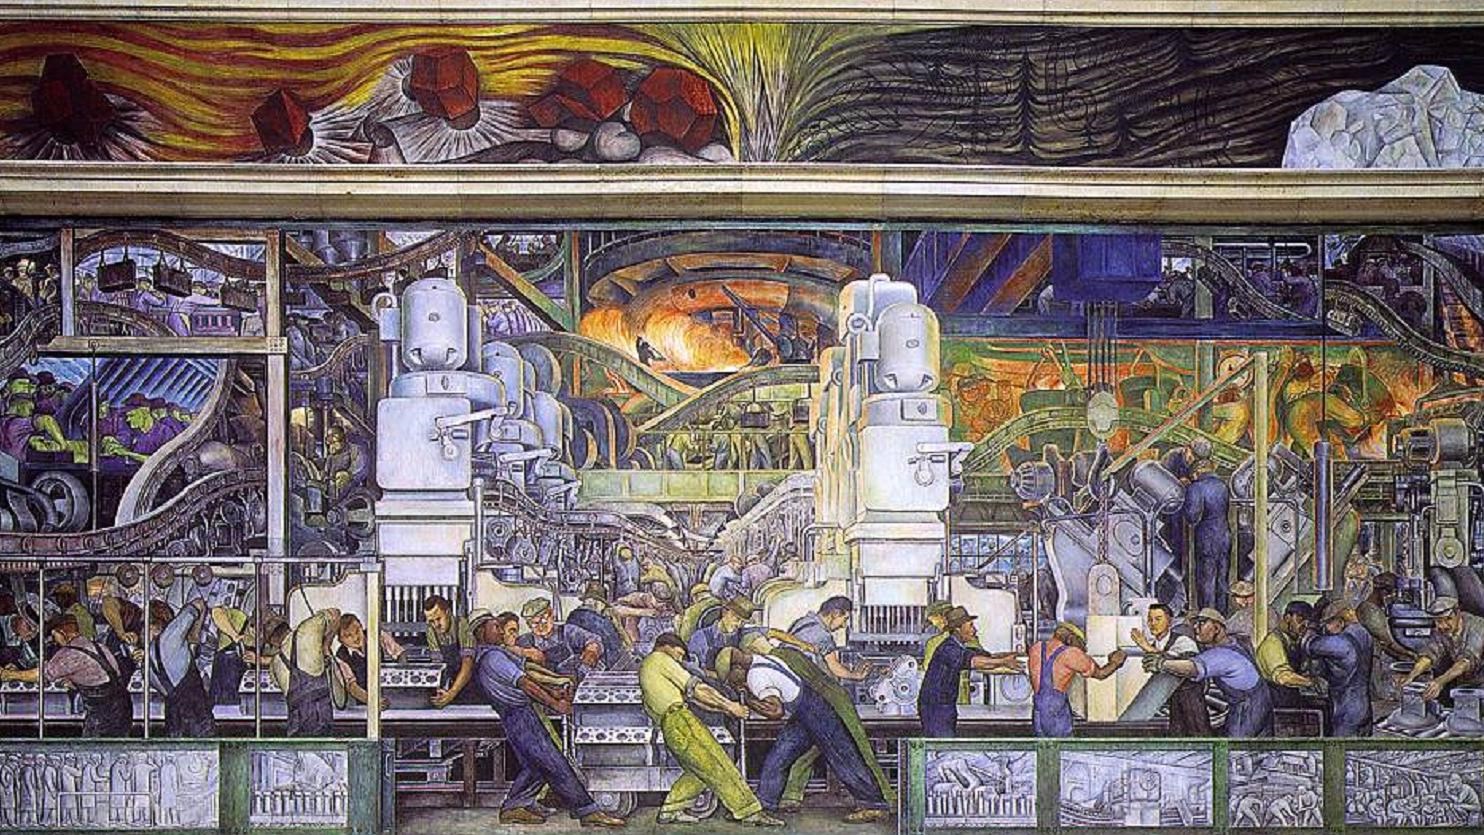 Mural of workers in auto-industry.